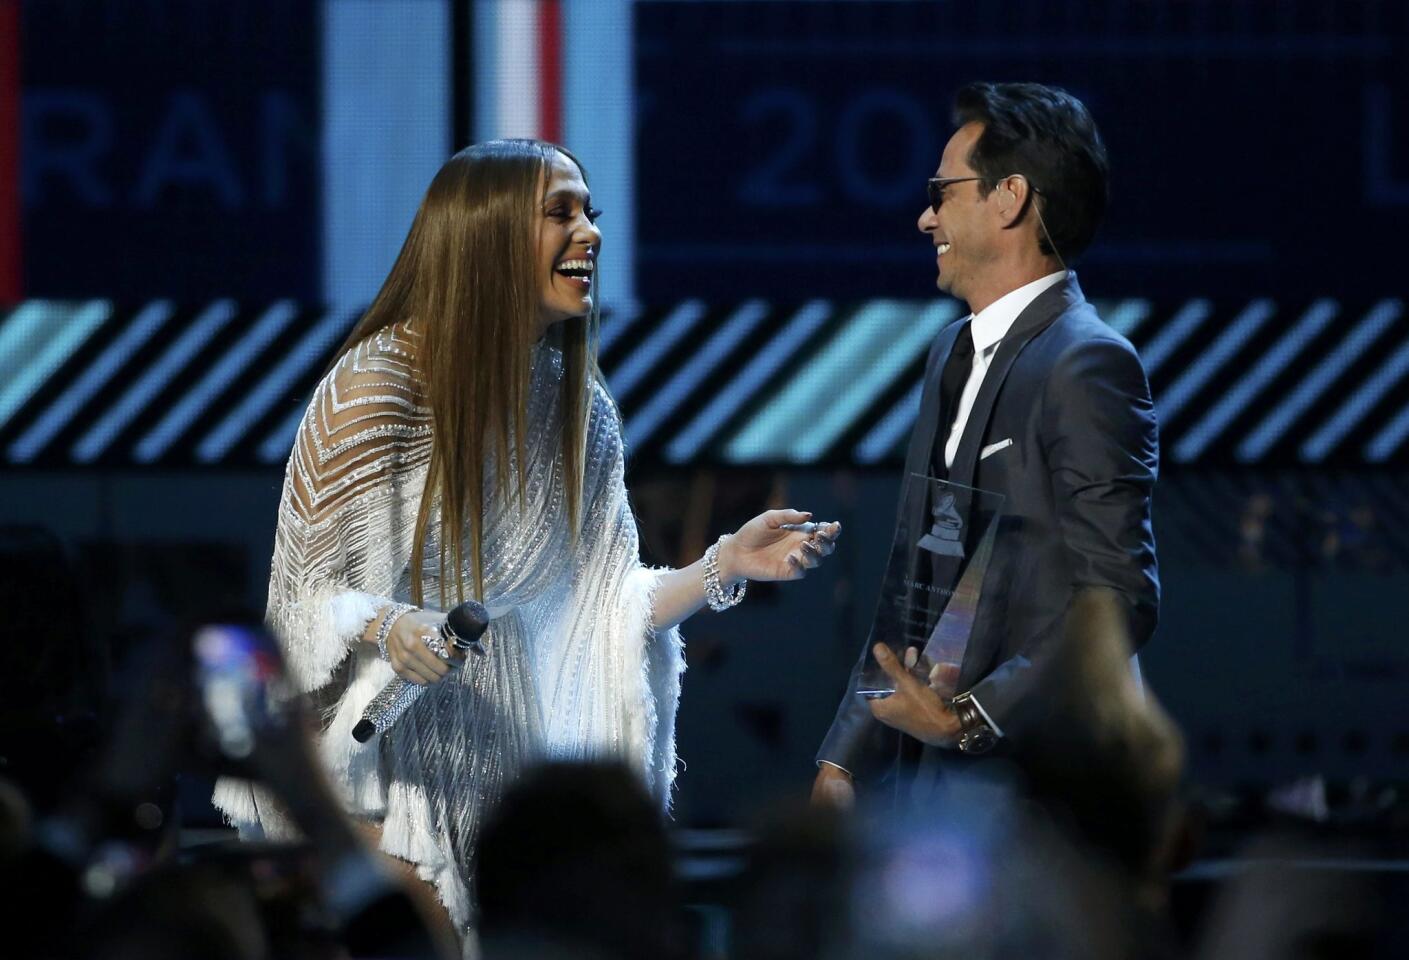 Lopez and Anthony react after she presented him with award honoring him as Latin Recording Academy person of the year at the 17th Annual Latin Grammy Awards in Las Vegas